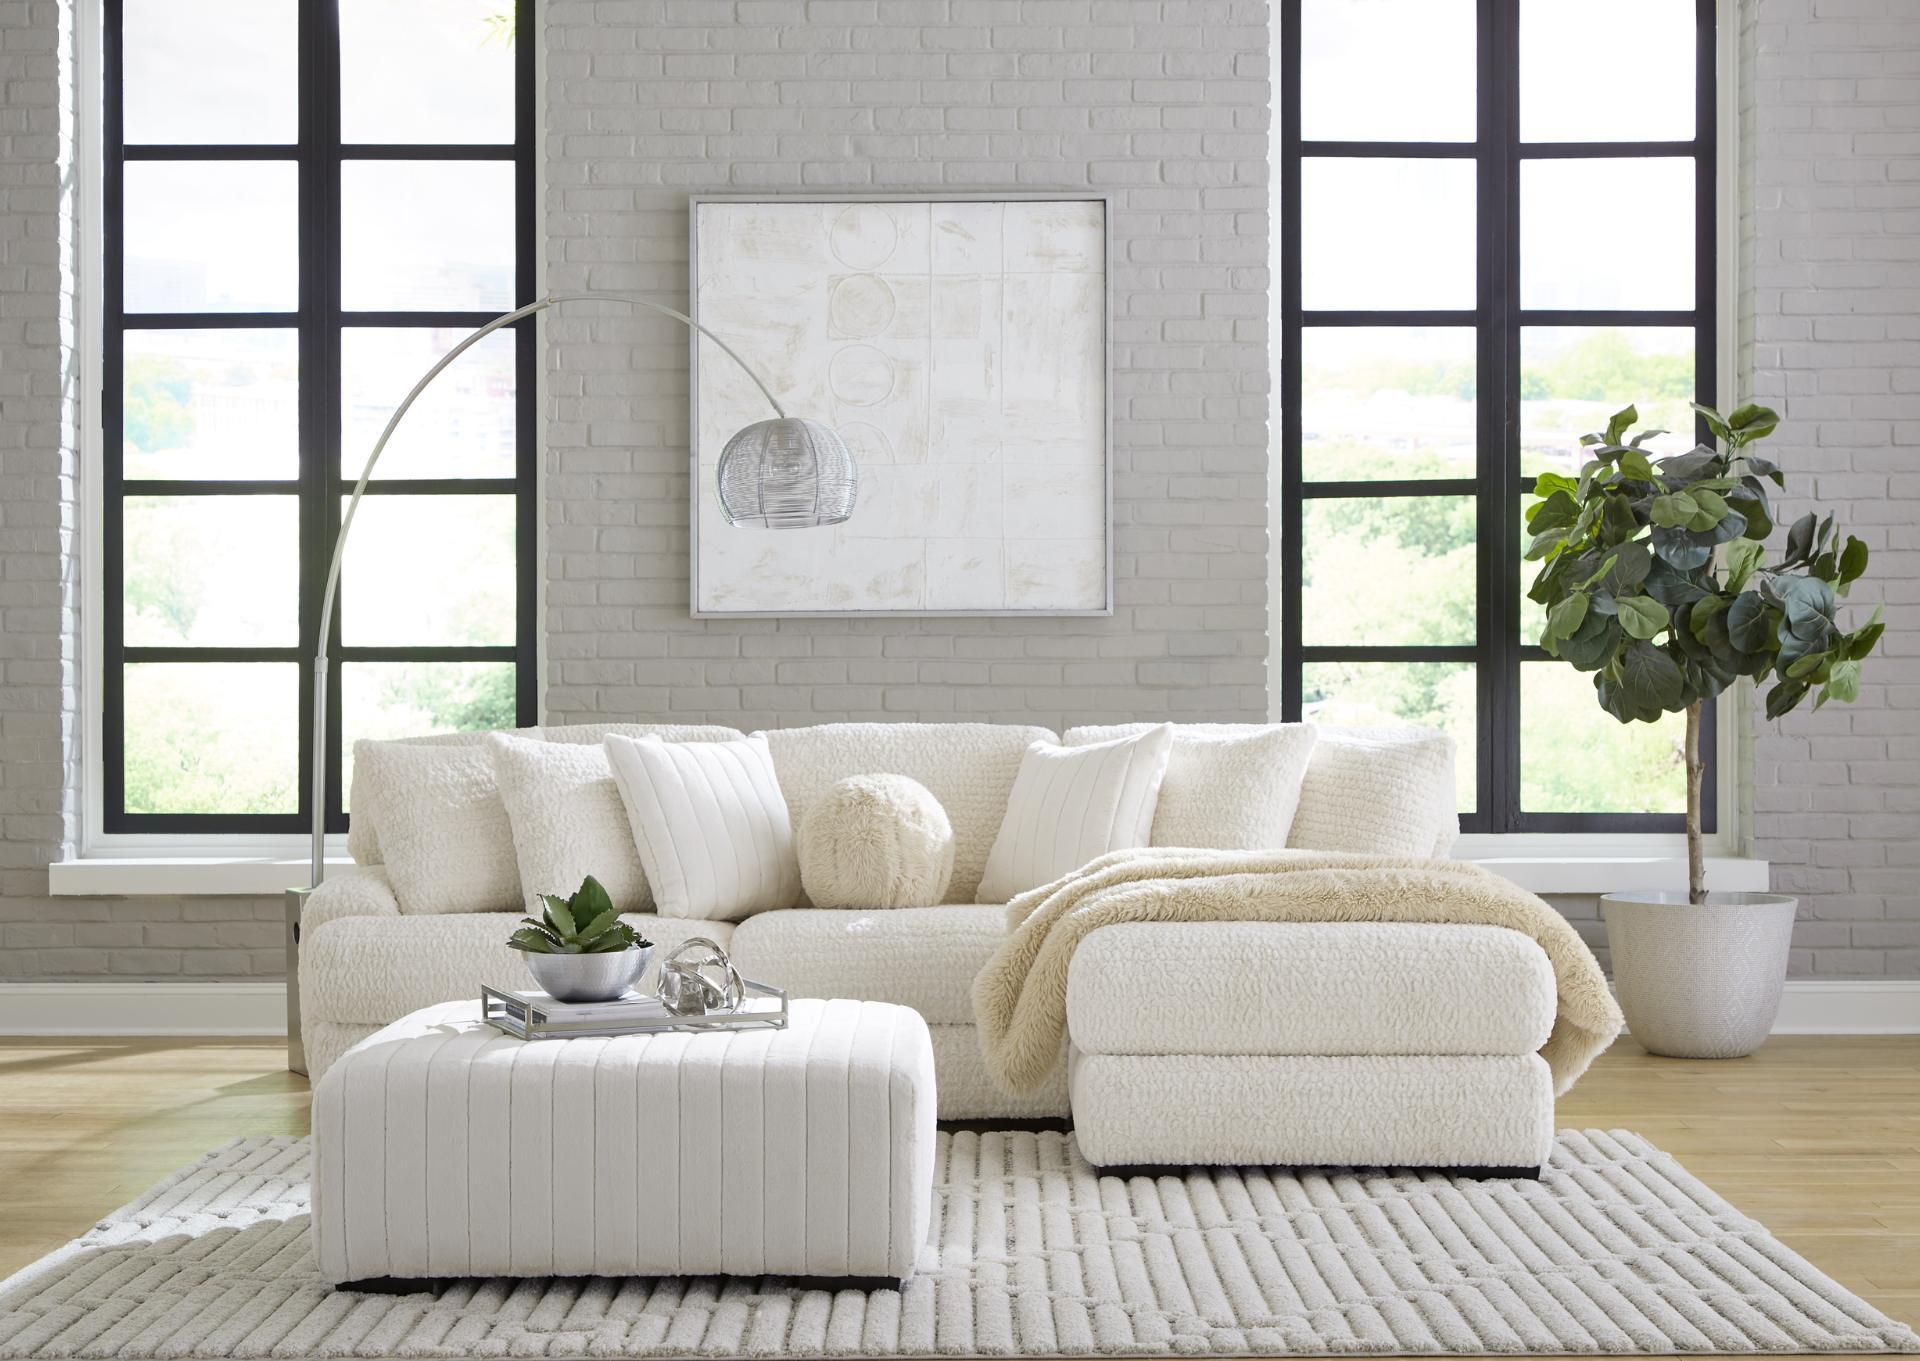 DOODLE IVORY 2 PIECE SECTIONAL,ALBANY INDUSTRIES, INC.